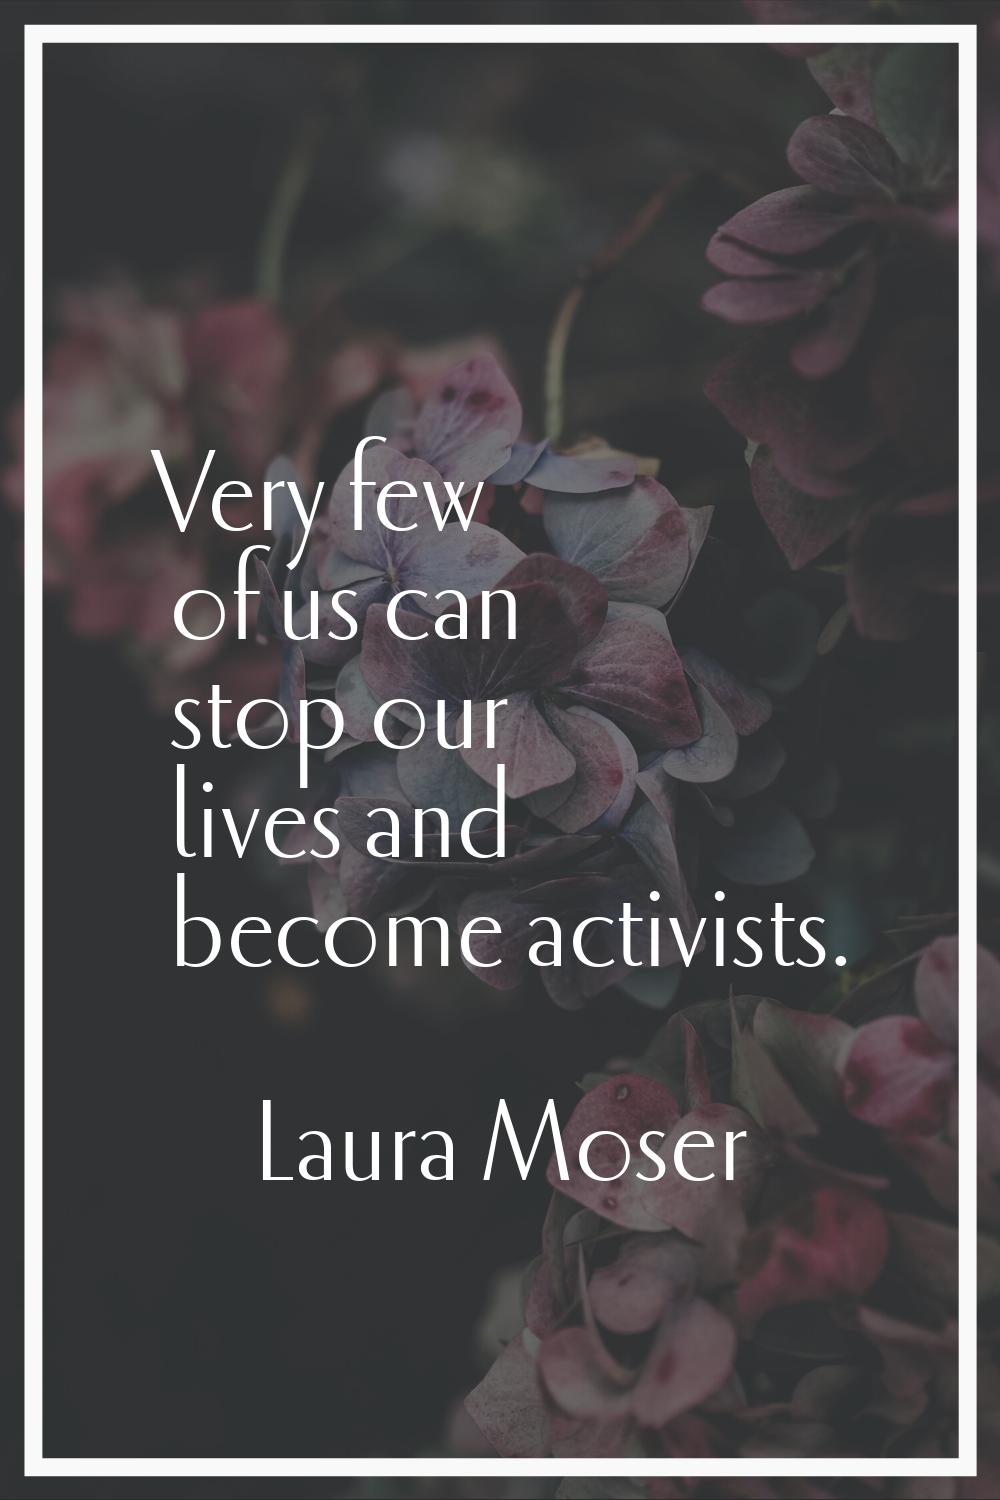 Very few of us can stop our lives and become activists.